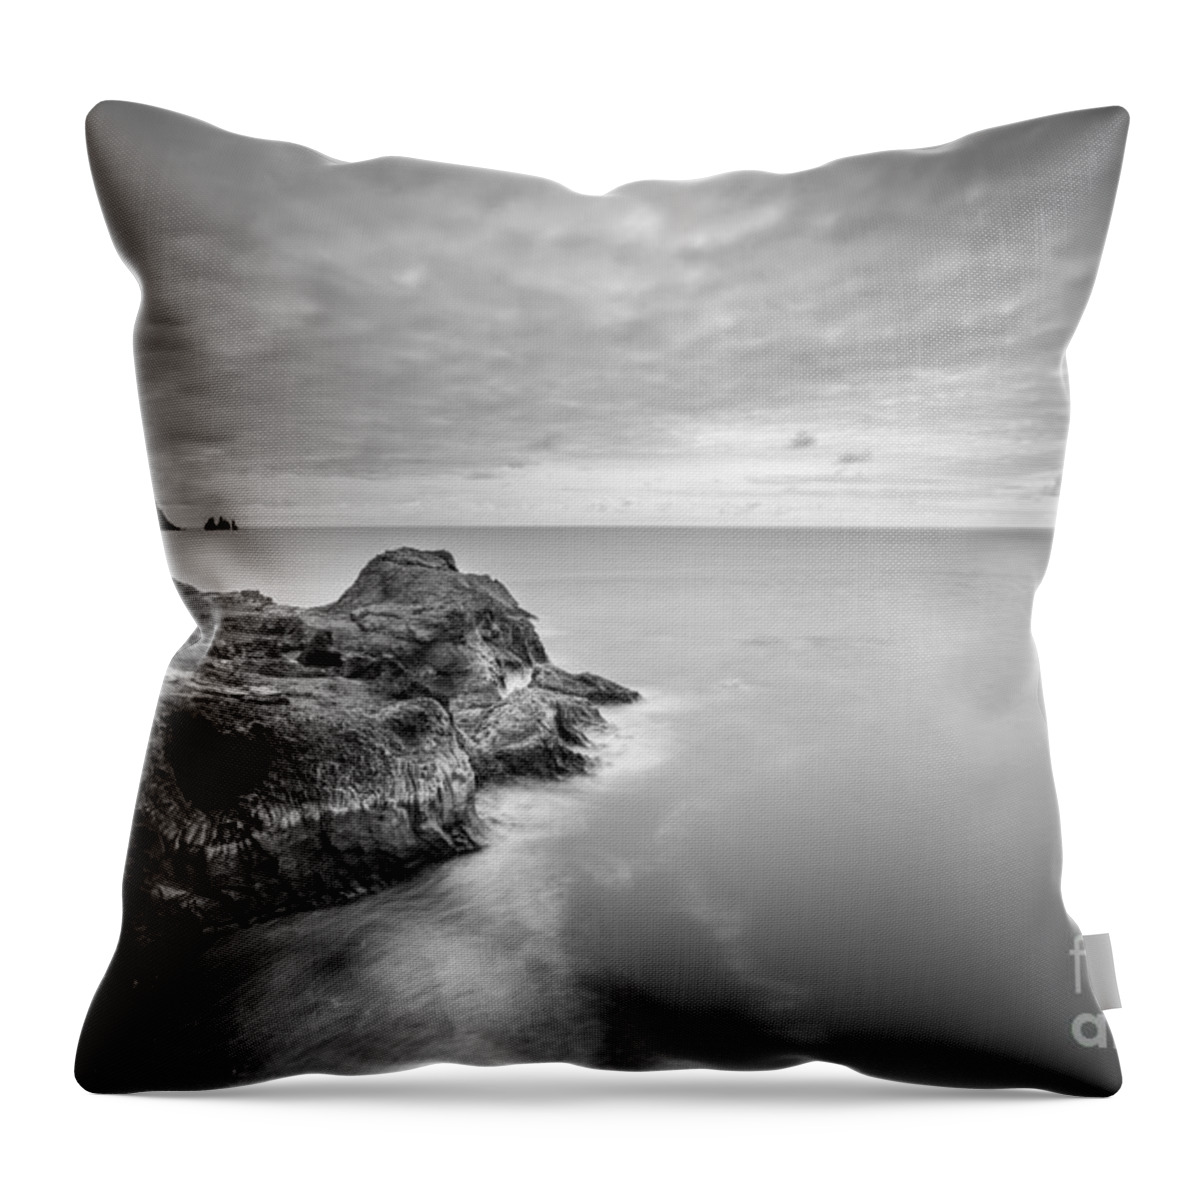 Vik Throw Pillow featuring the photograph Iceland Seascape At Vik BW by Michael Ver Sprill